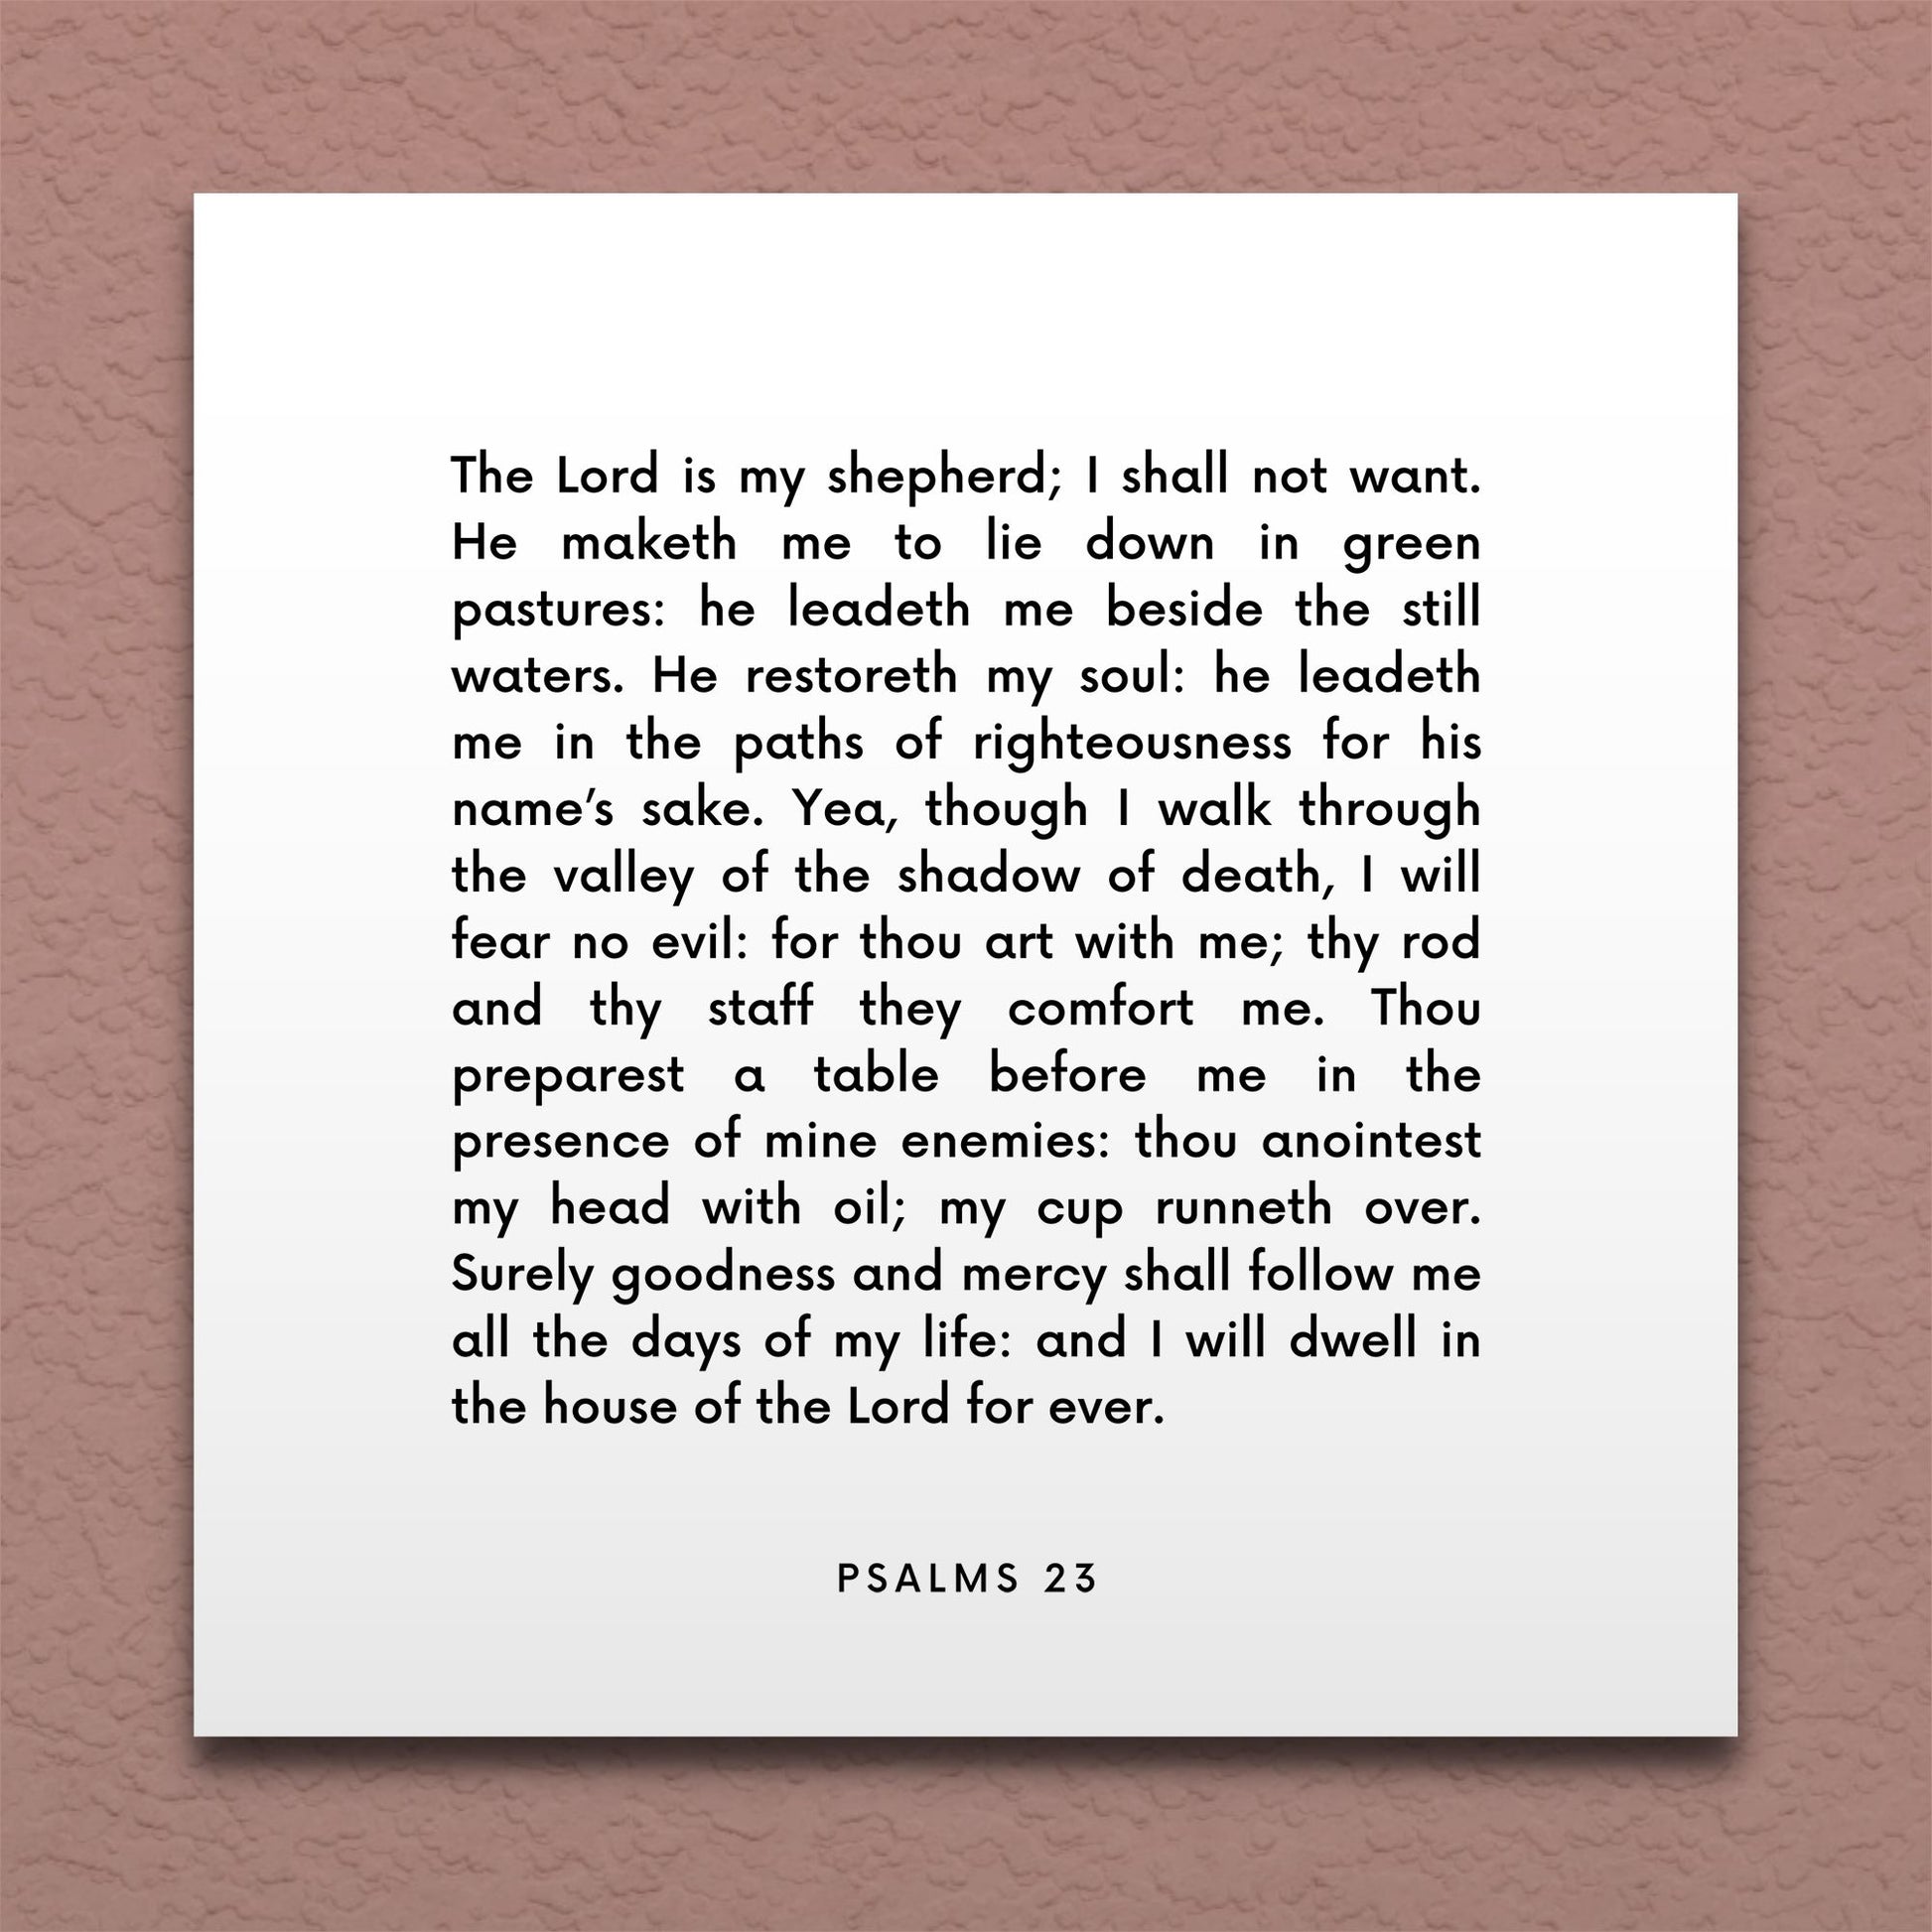 Wall-mounted scripture tile for Psalms 23 - "I will dwell in the house of the Lord for ever"